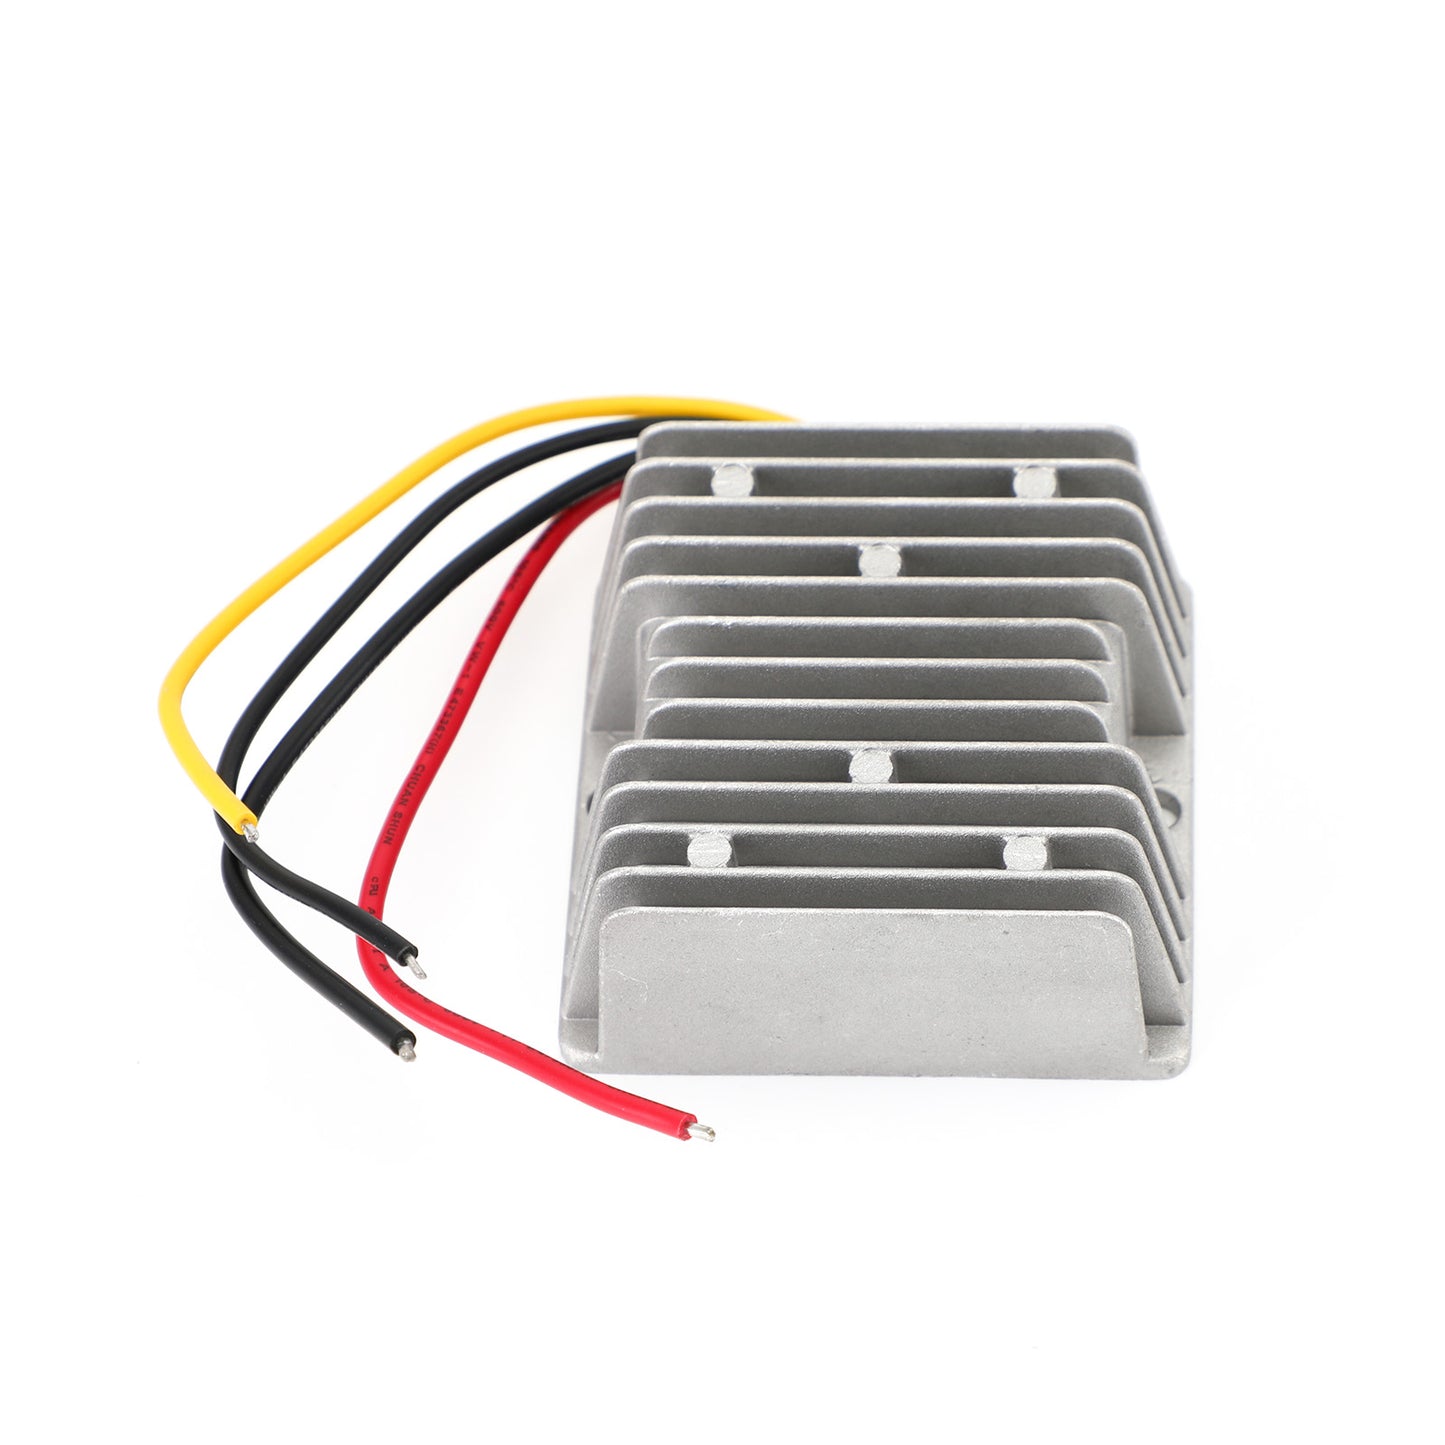 24V Auf 48V DC-DC Step Up Boost Spannungswandler 3A 144W Industrie-Netzteile